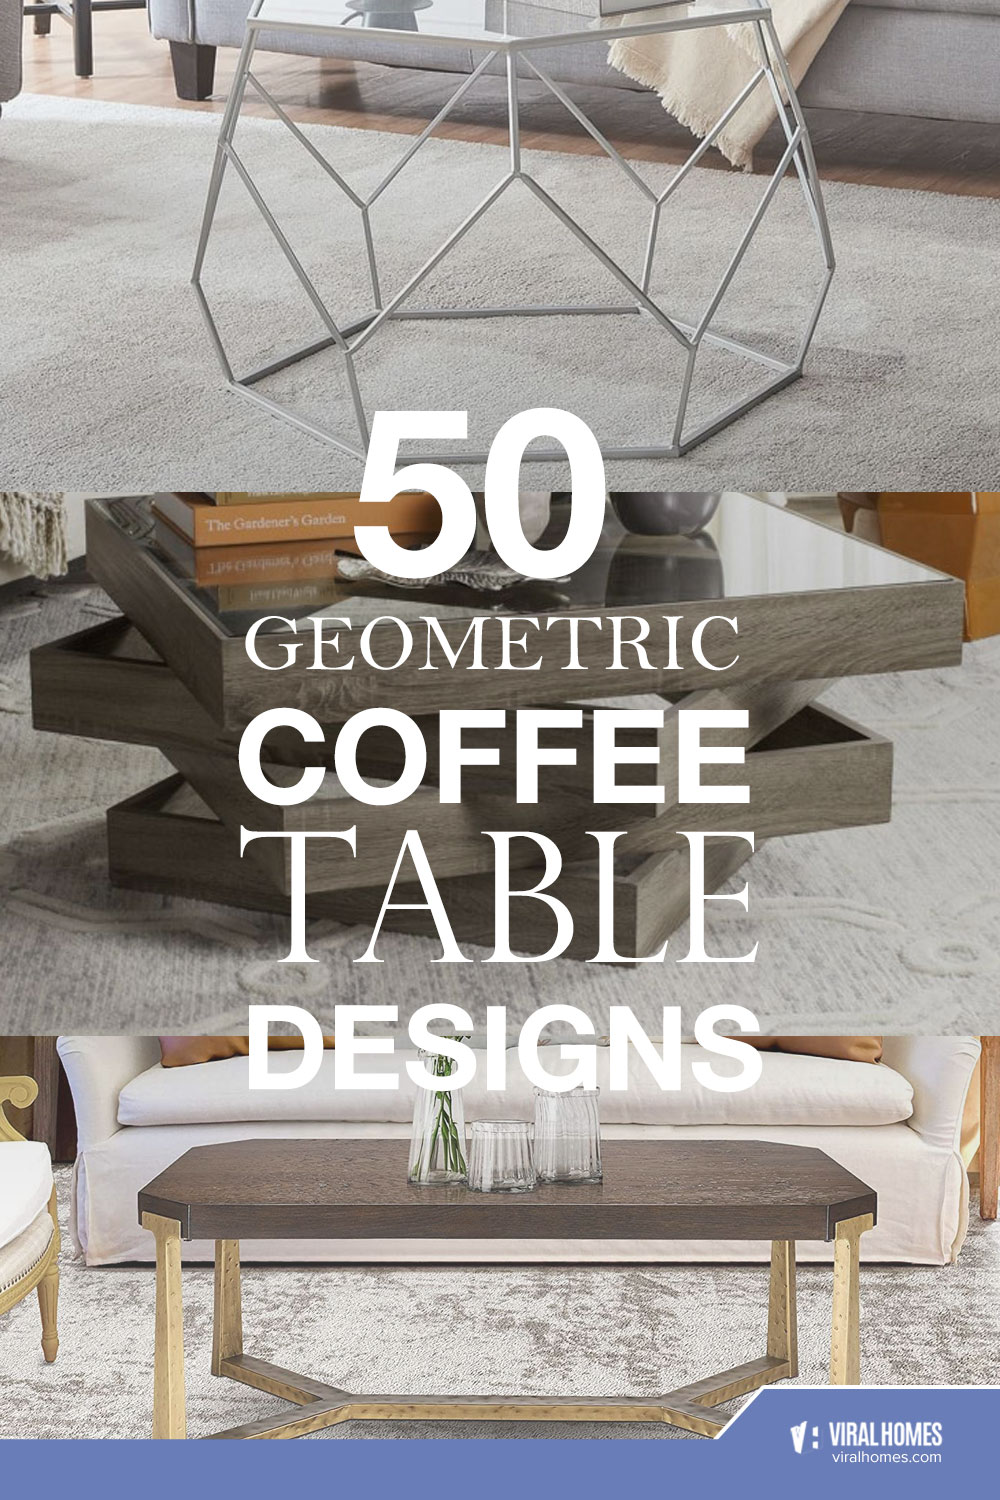 Edgy Geometric Coffee Tables To Add Texture To Your Home